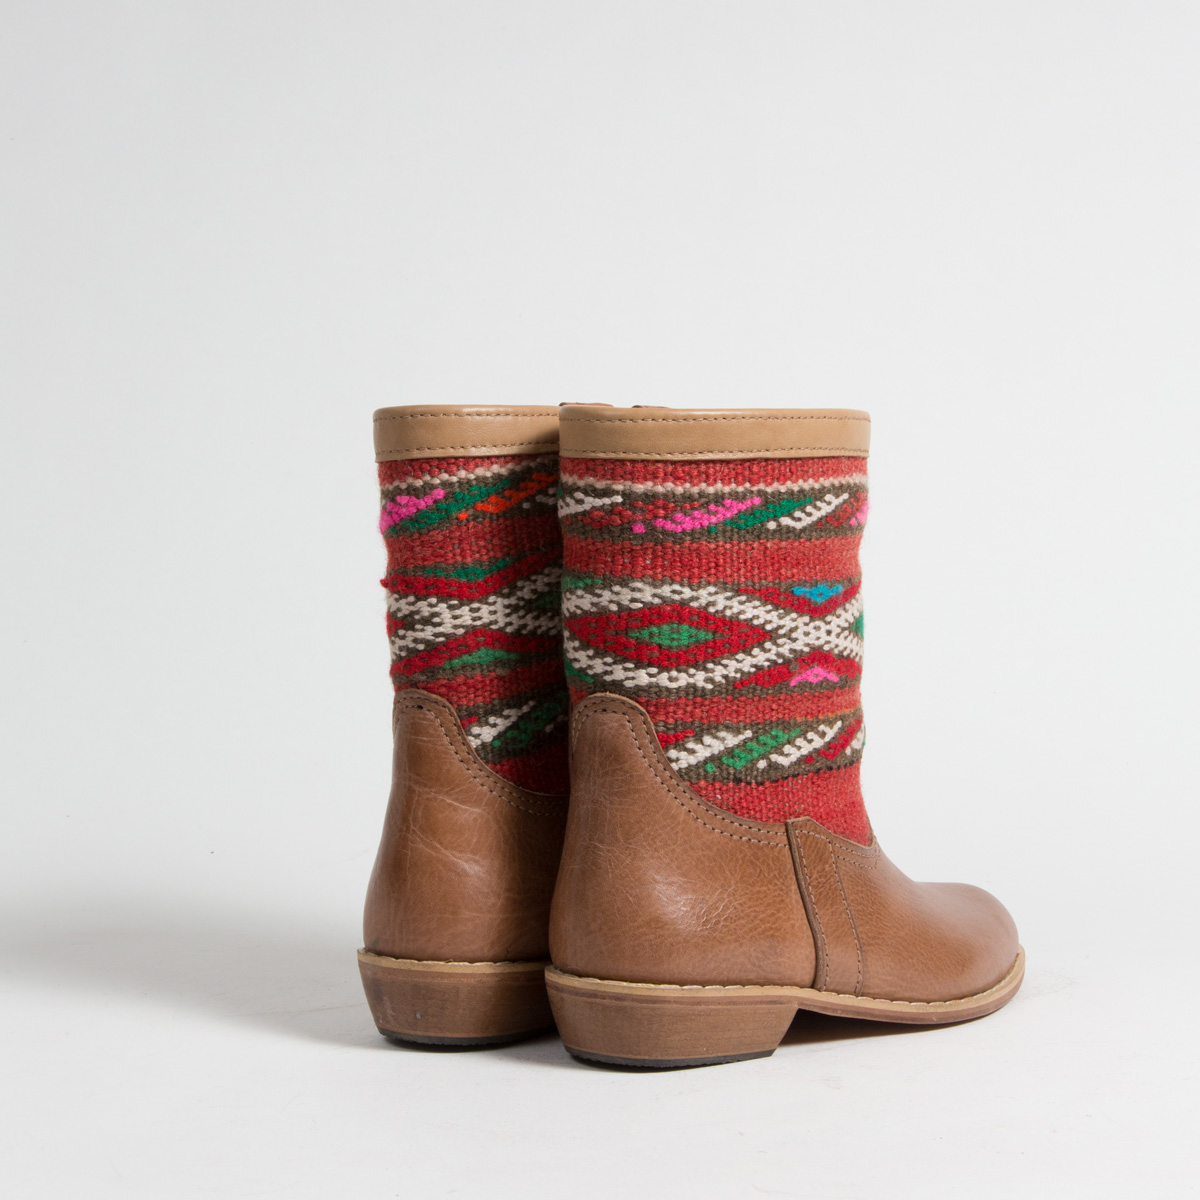 Bottines Kilim cuir mababouche artisanales (Réf. MCH1-36)